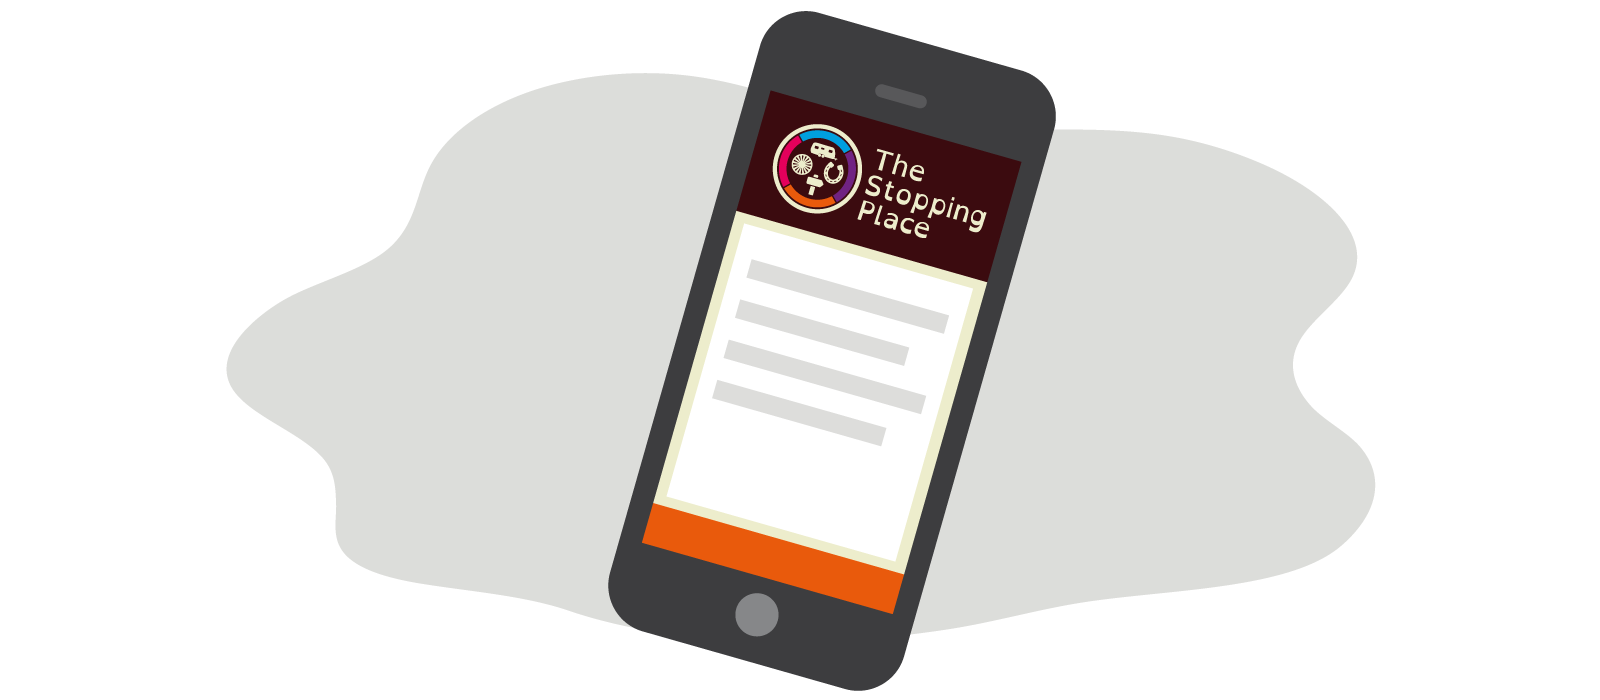 The Stopping Place Website on a mobile phone